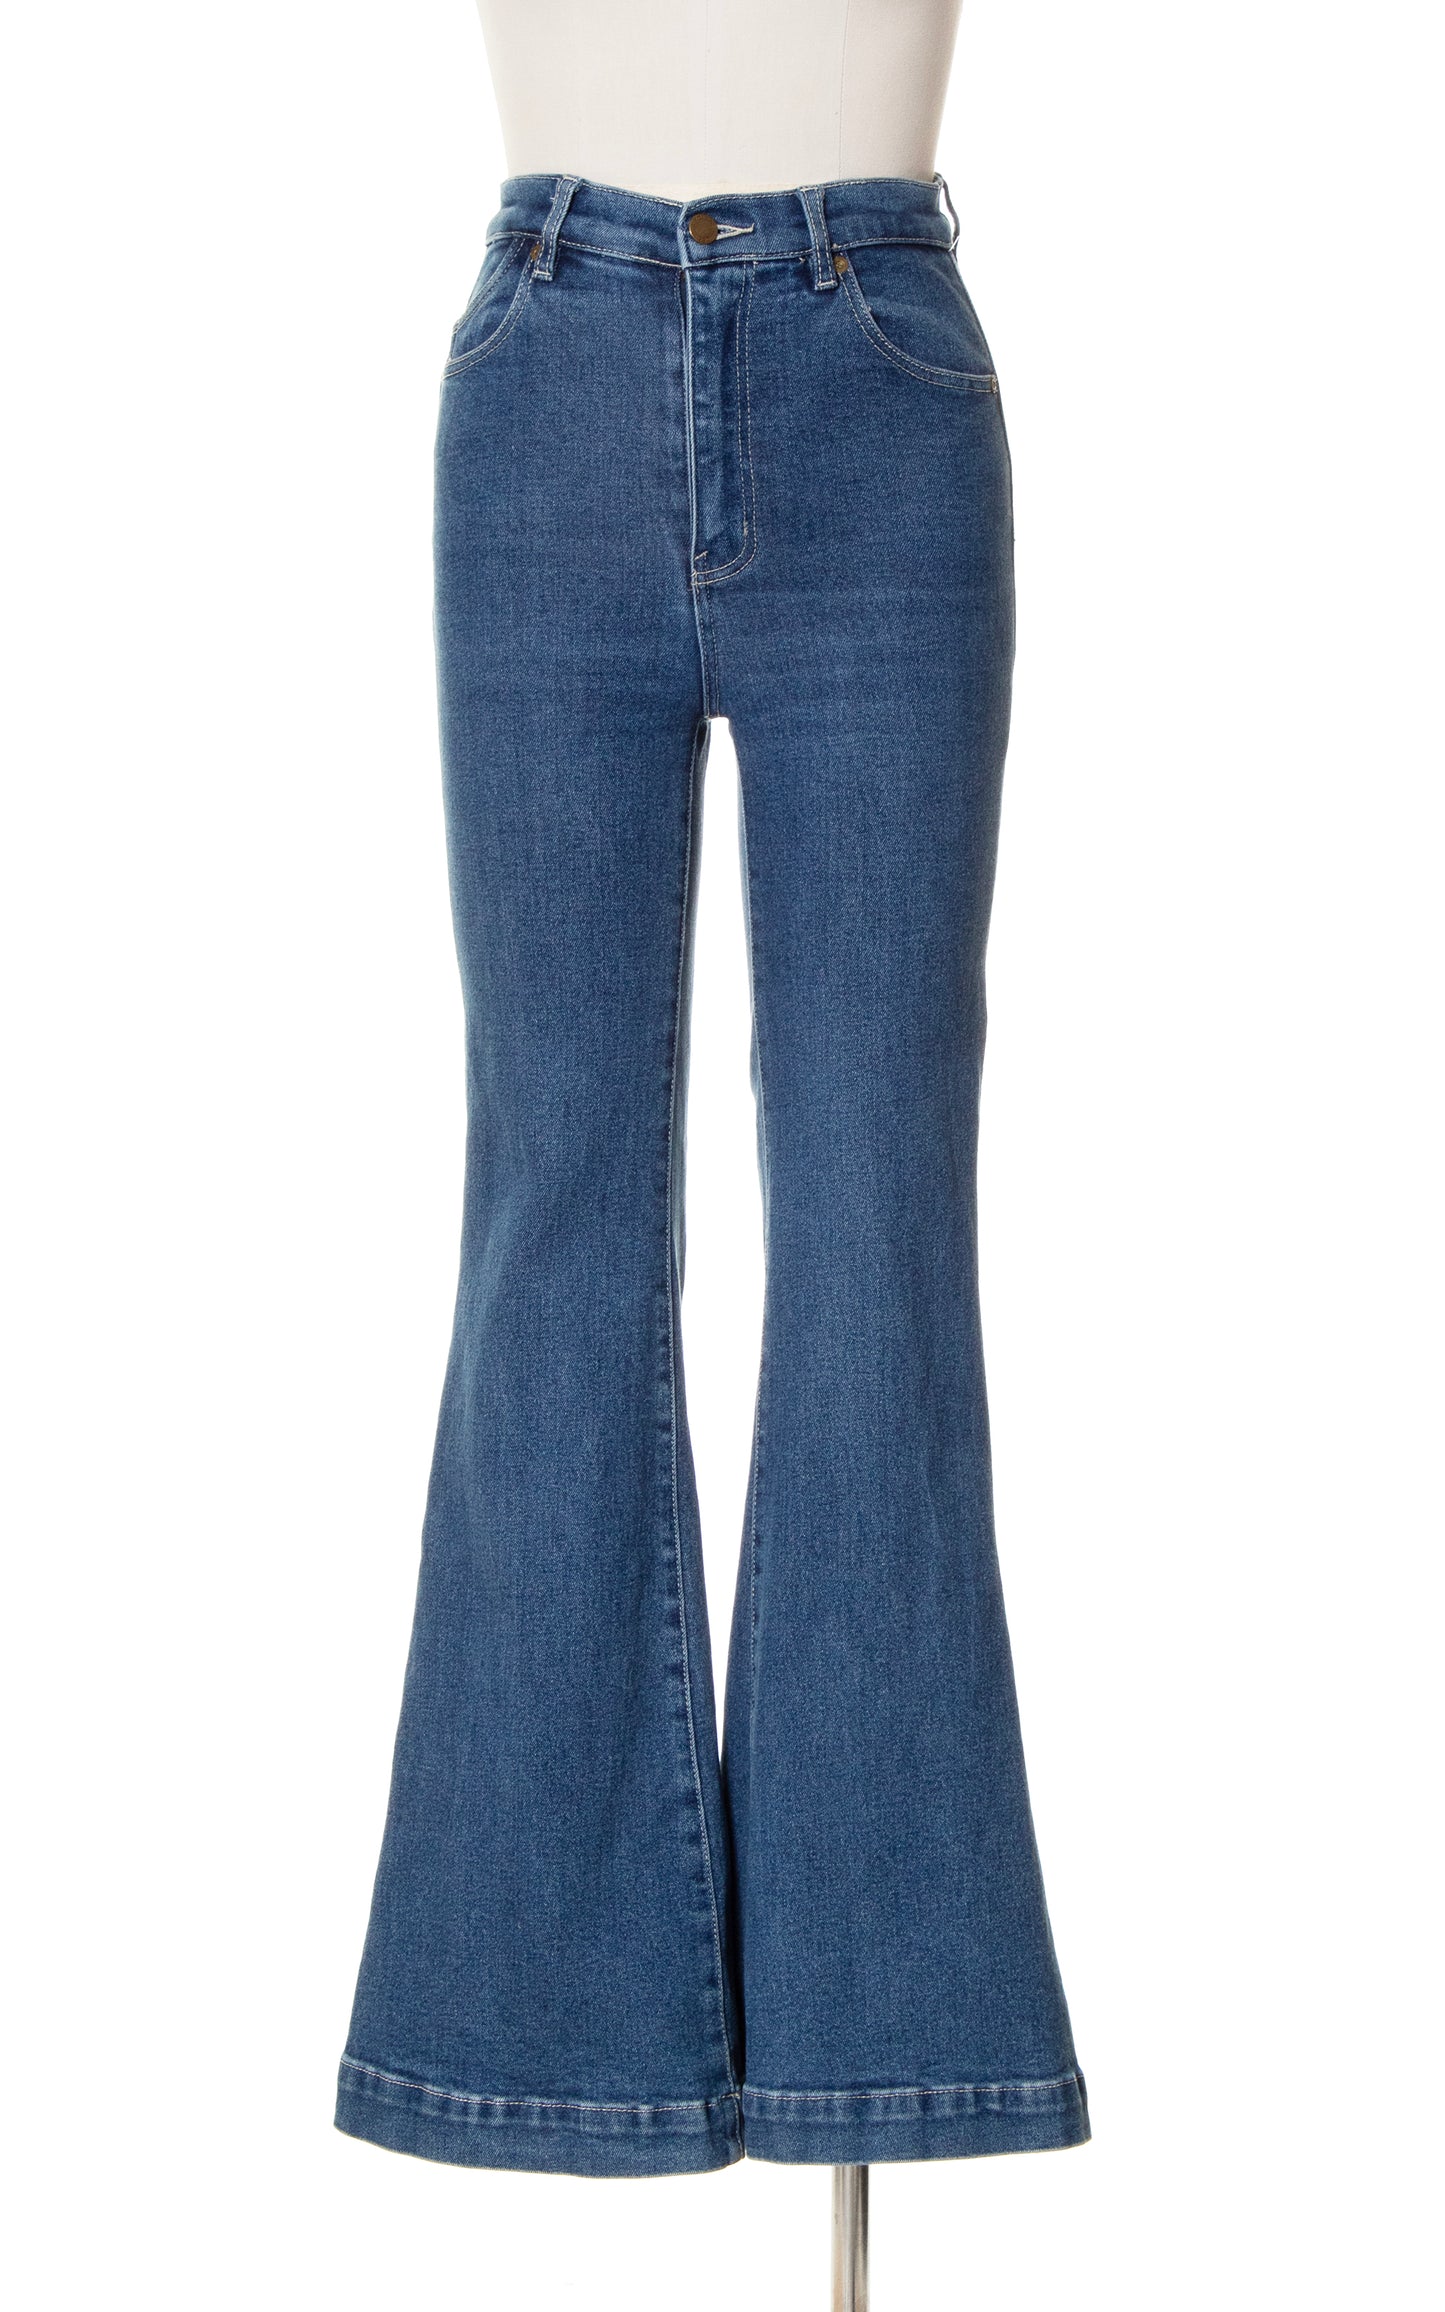 MODERN Rolla's "Eastcoast Flare" Stretchy Bell Bottom Jeans | x-small/small